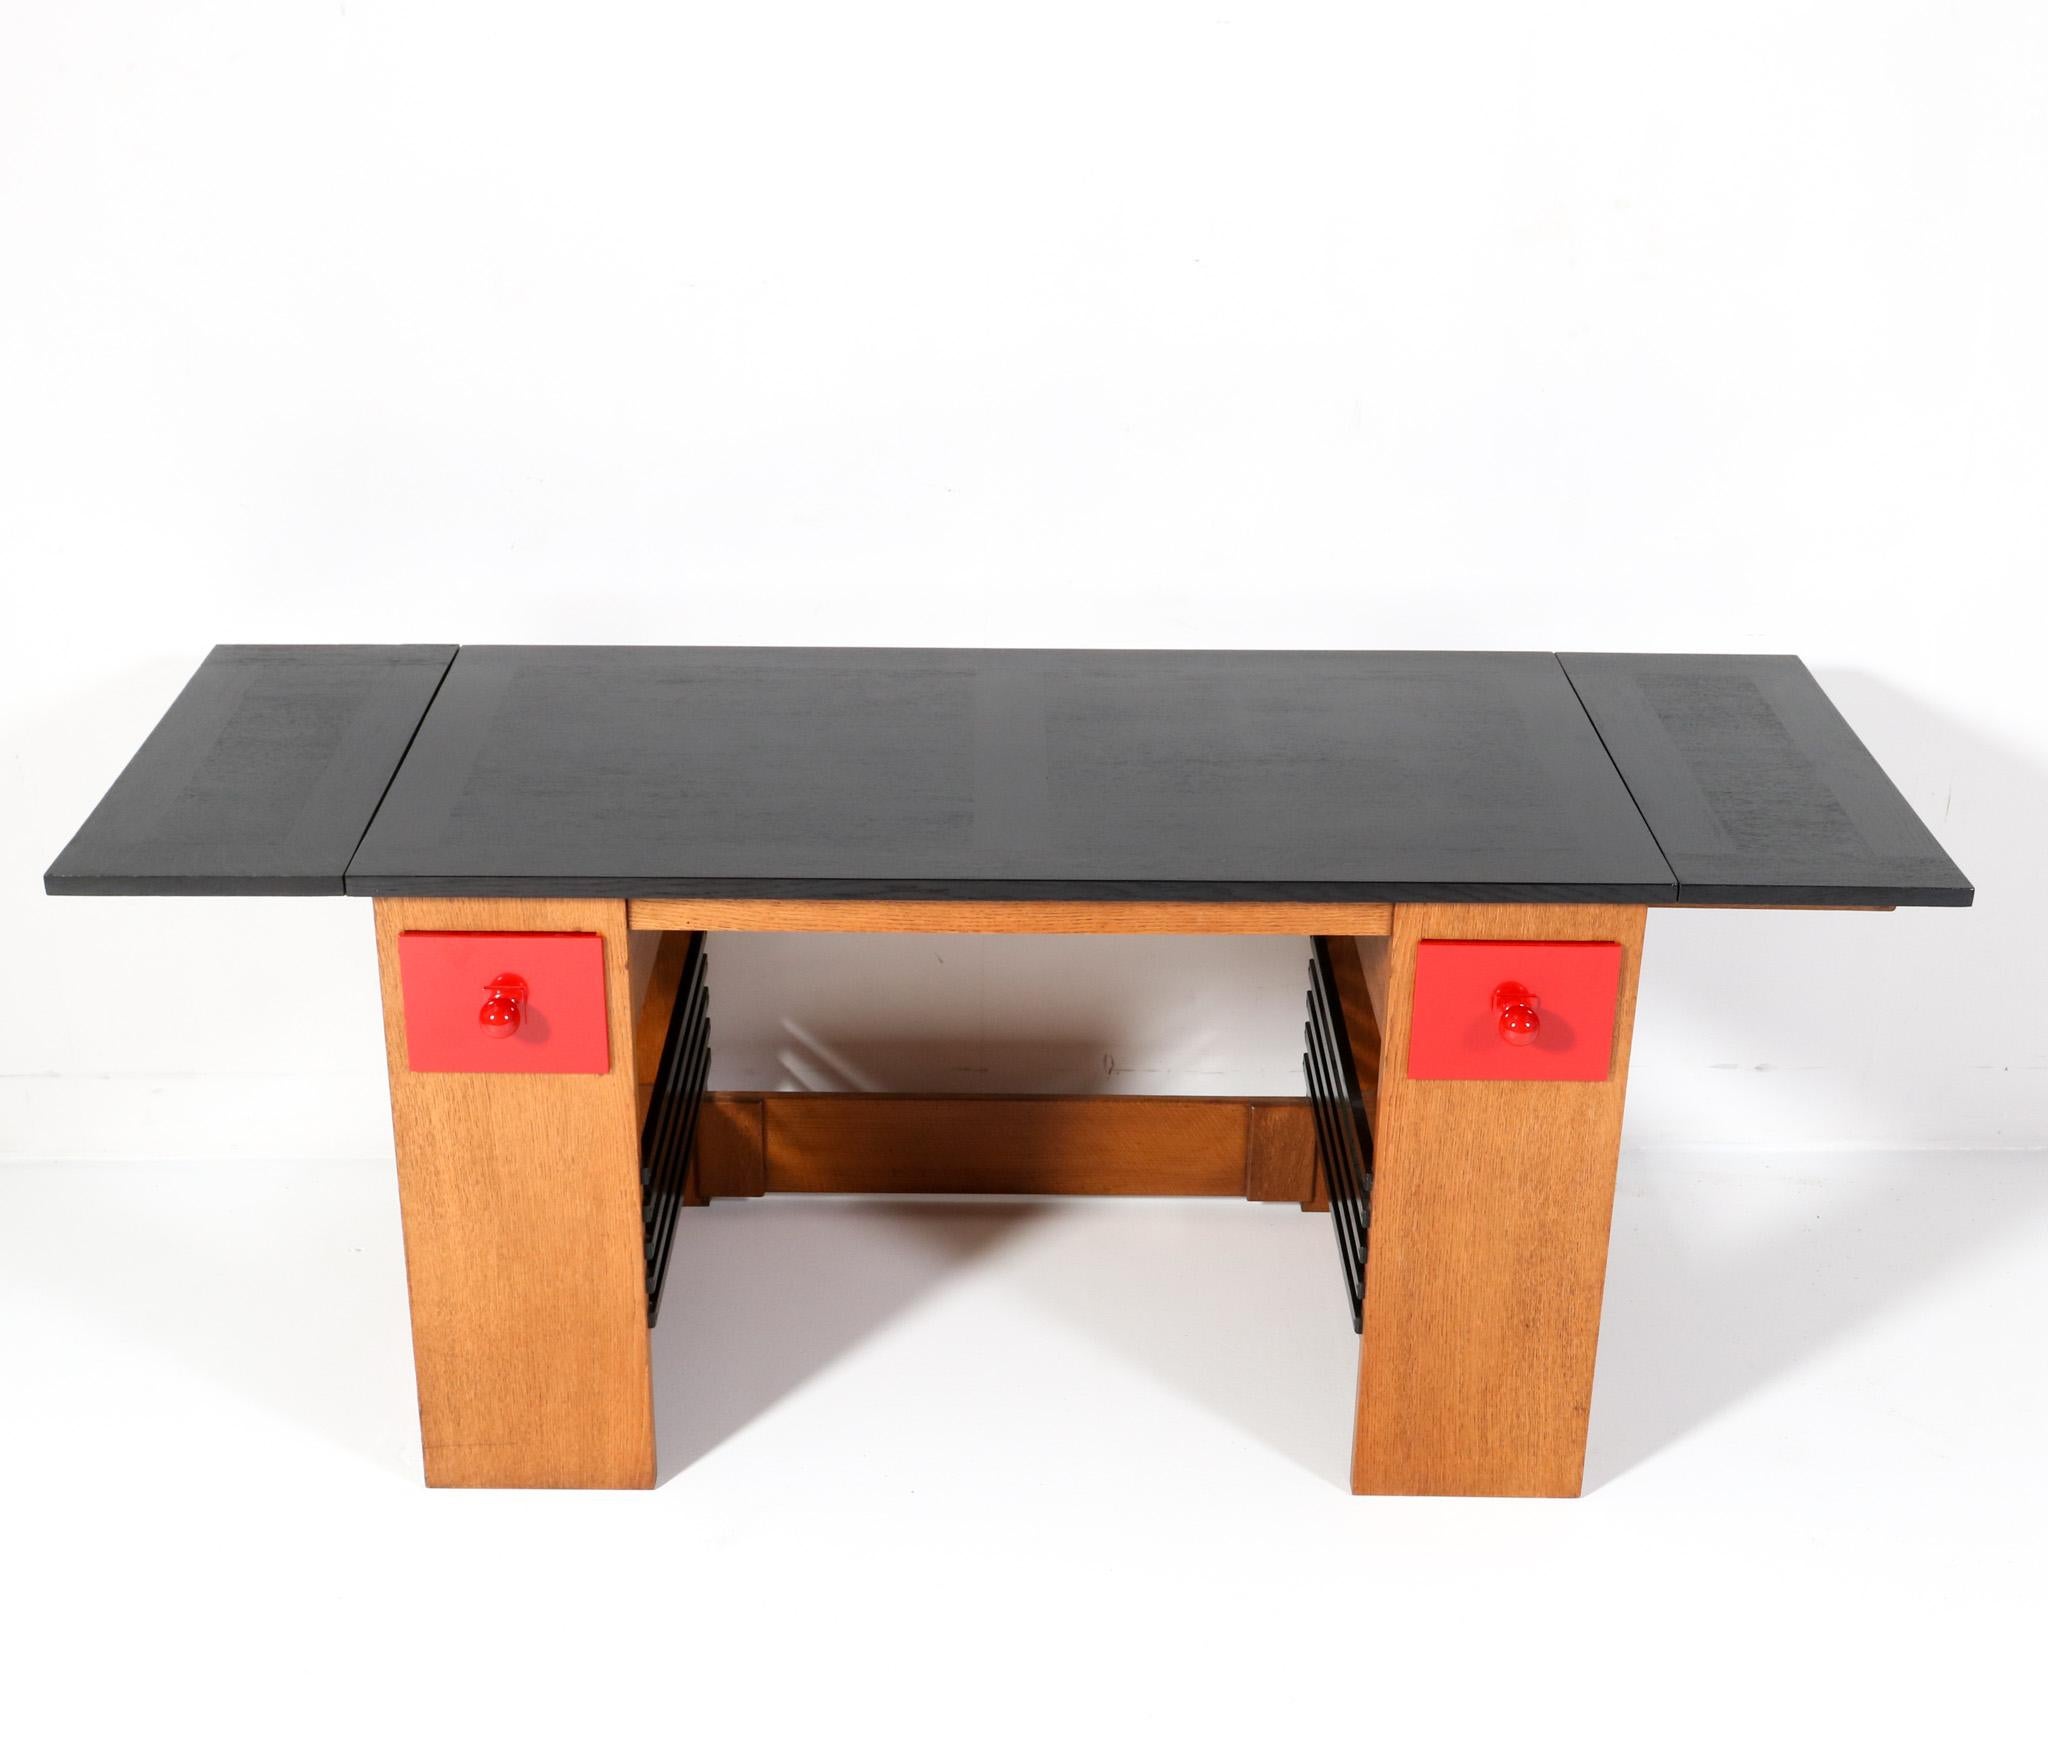  Art Deco Modernist Desk or Writing Table by Hendrik Wouda for Pander, 1920s For Sale 1